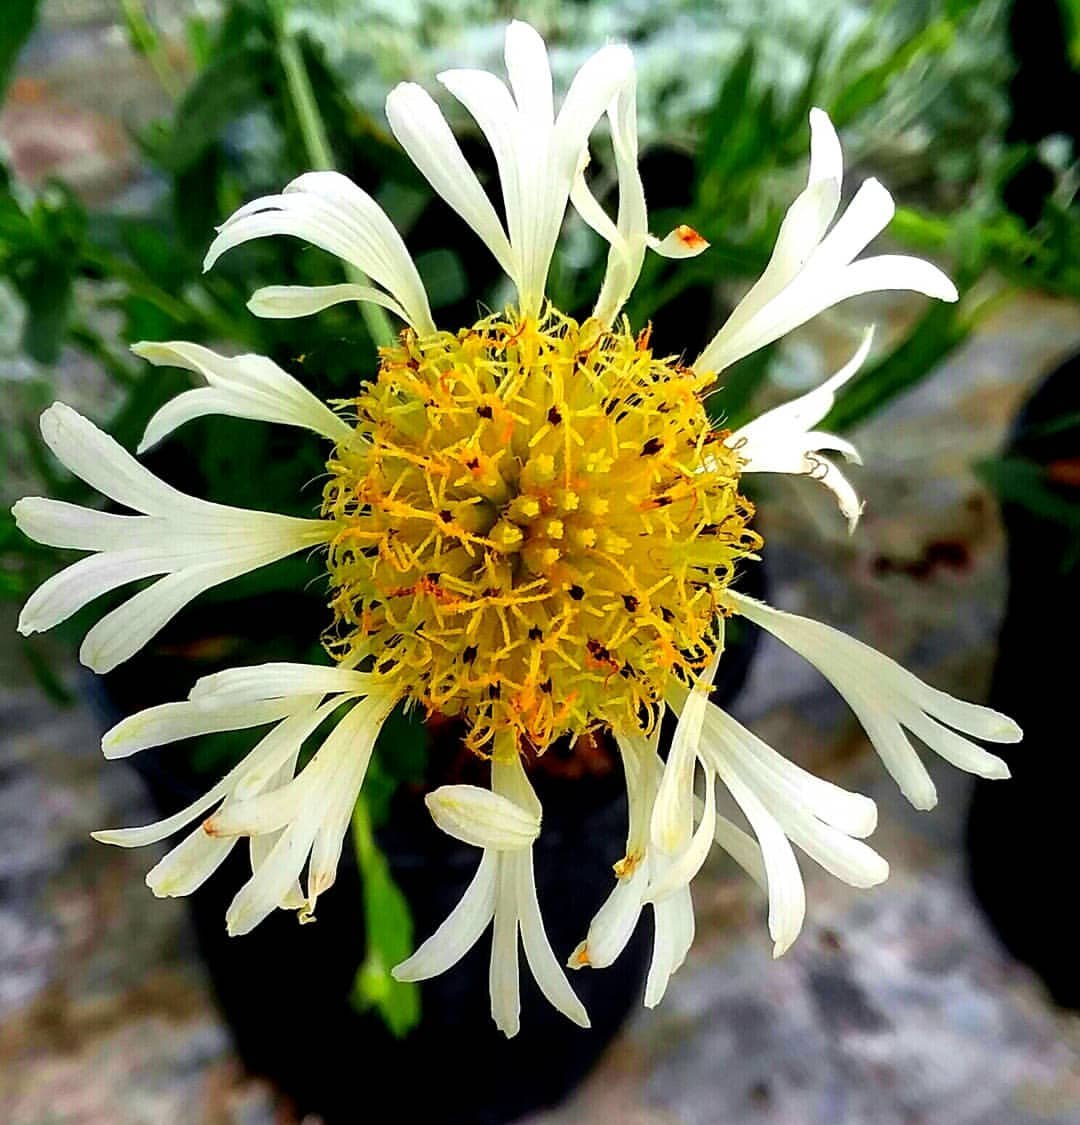 White Gaillardia flower with yellow centers in a pot.

